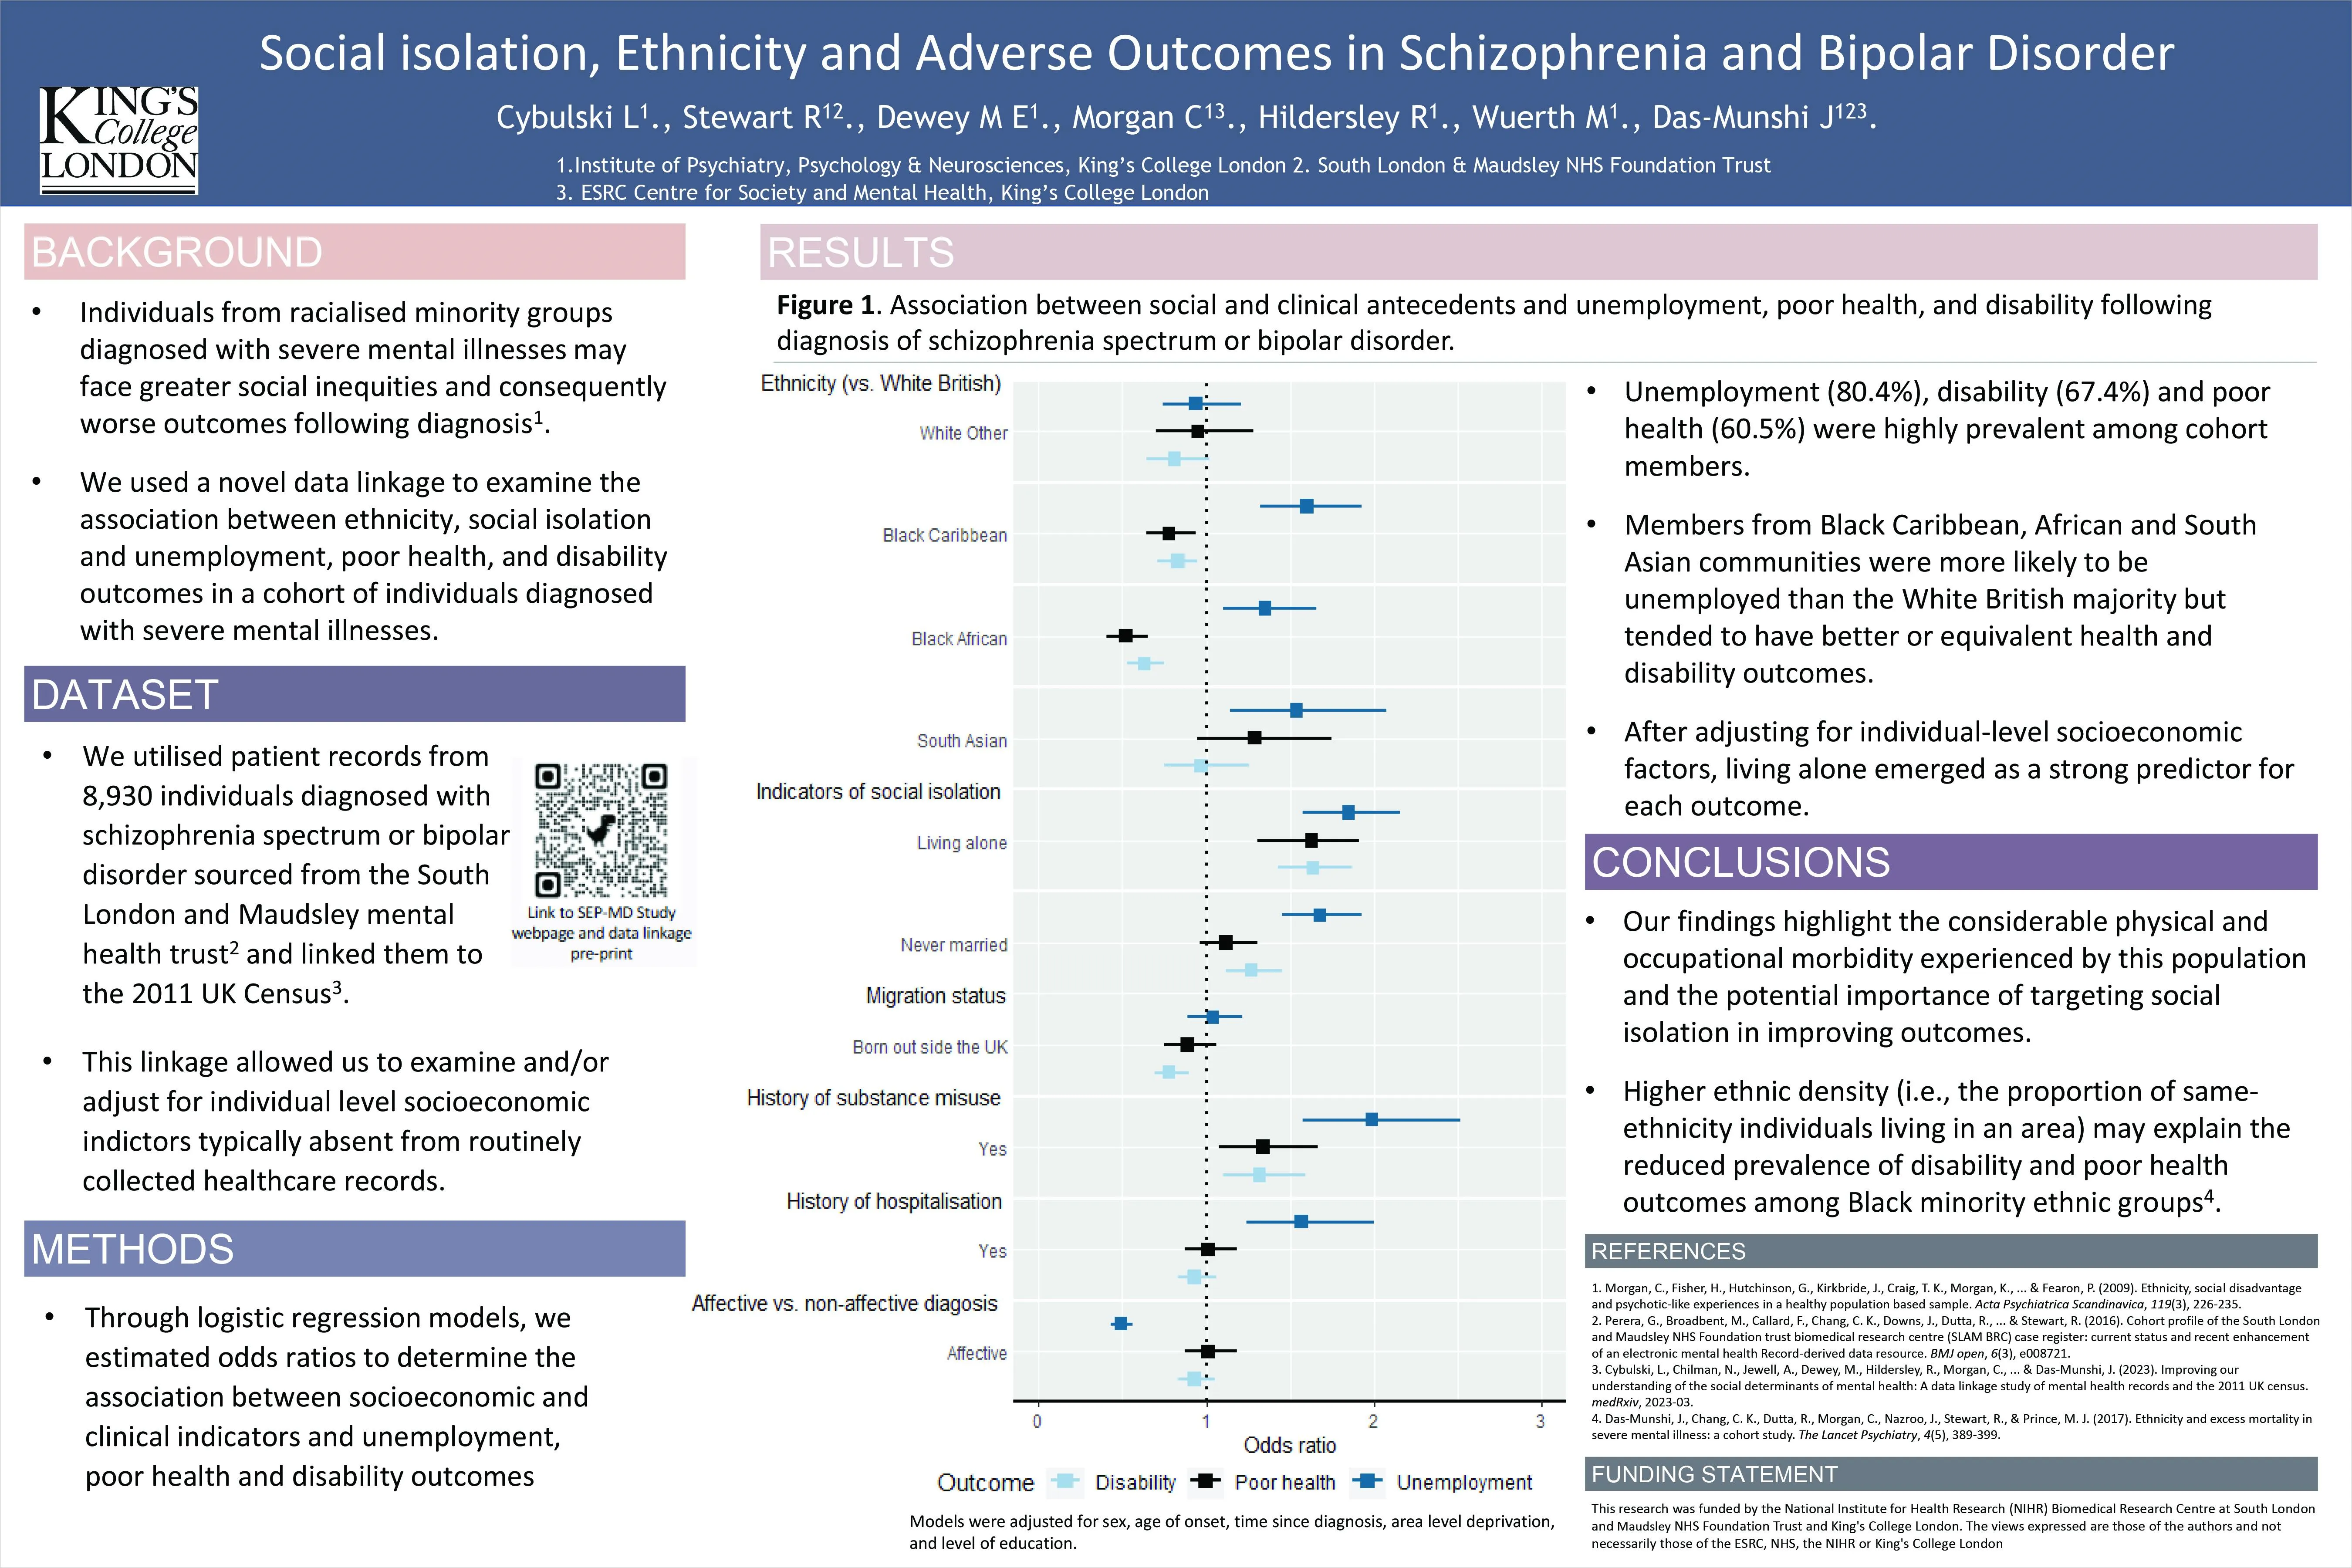 Social isolation ethnicity and adverse outcomes in Sz and BD